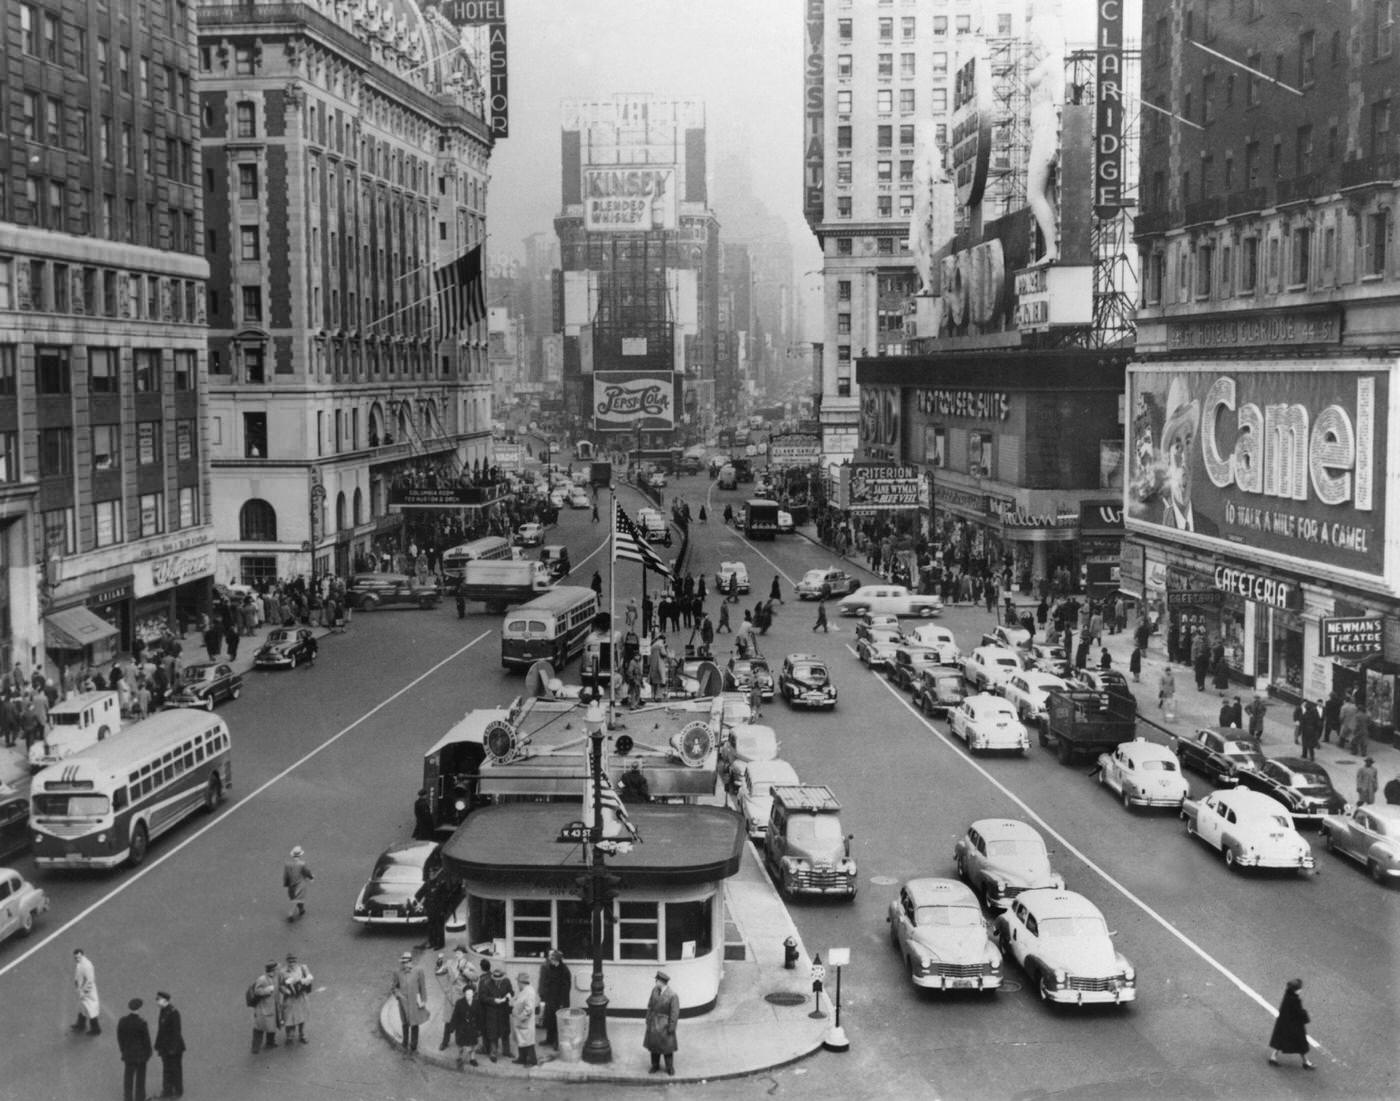 Times Square In New York: View Of The Traffic In Times Square, Manhattan, 1956